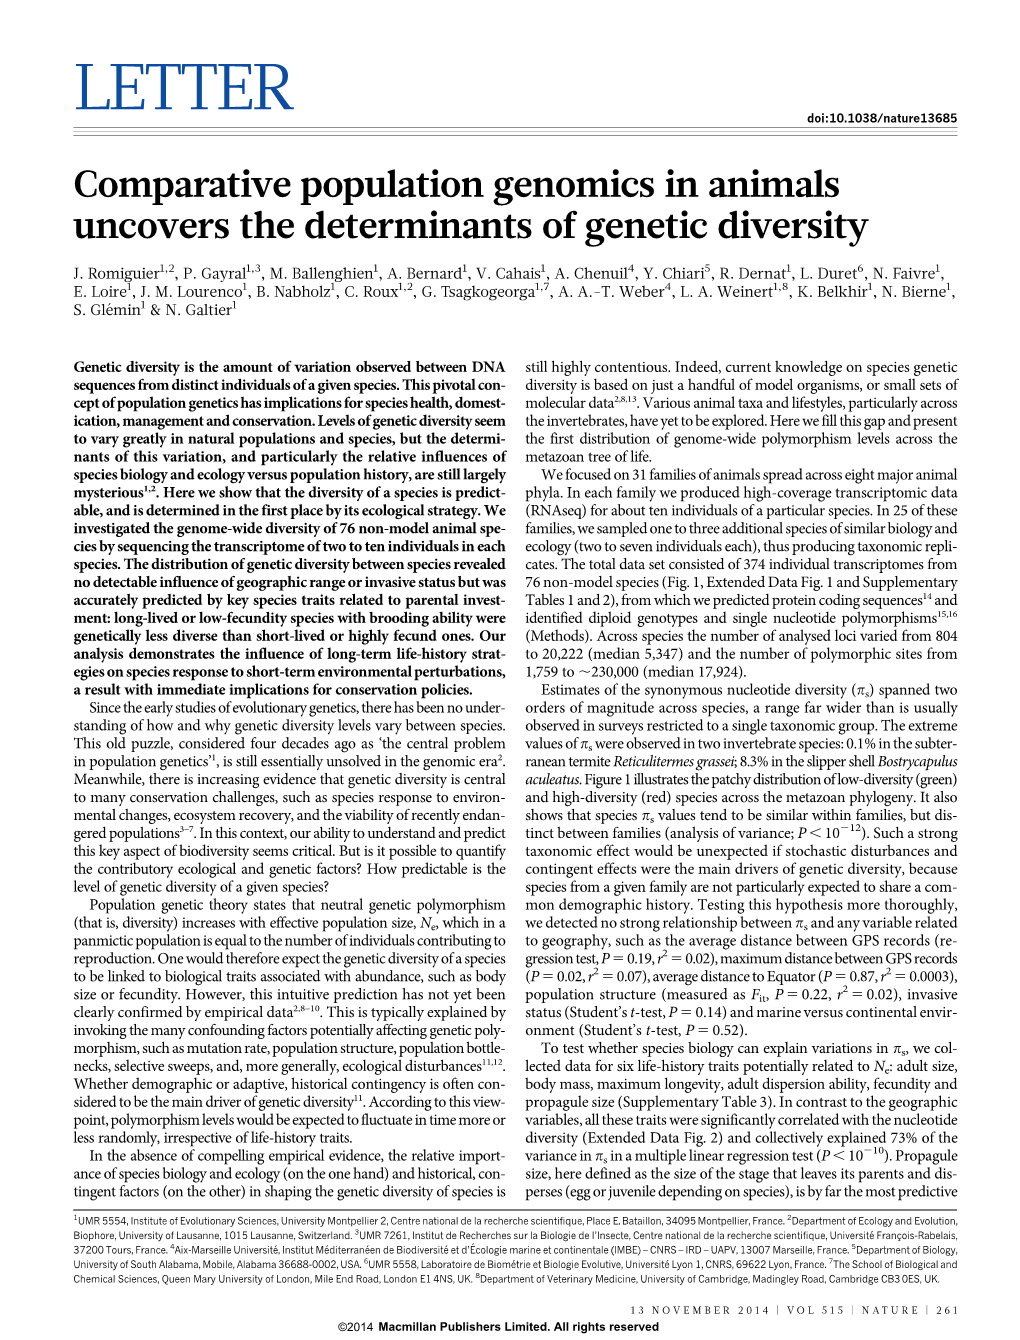 Comparative Population Genomics in Animals Uncovers the Determinants of Genetic Diversity